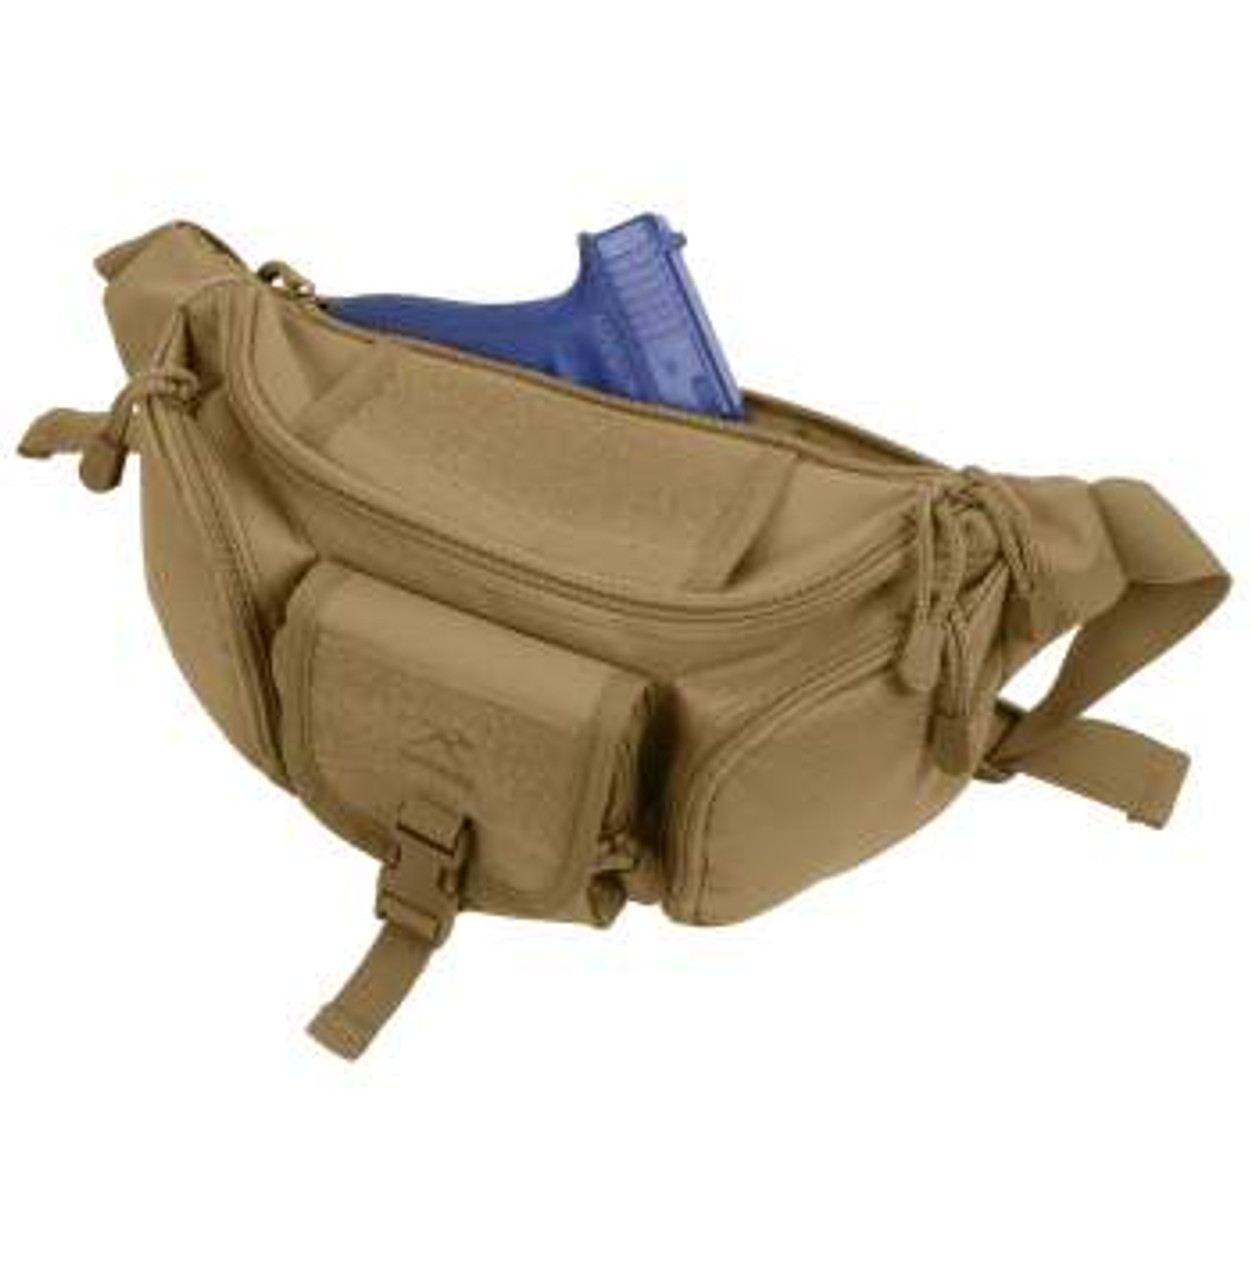 Rothco Tactical Concealed Carry Waist Pack, Tan